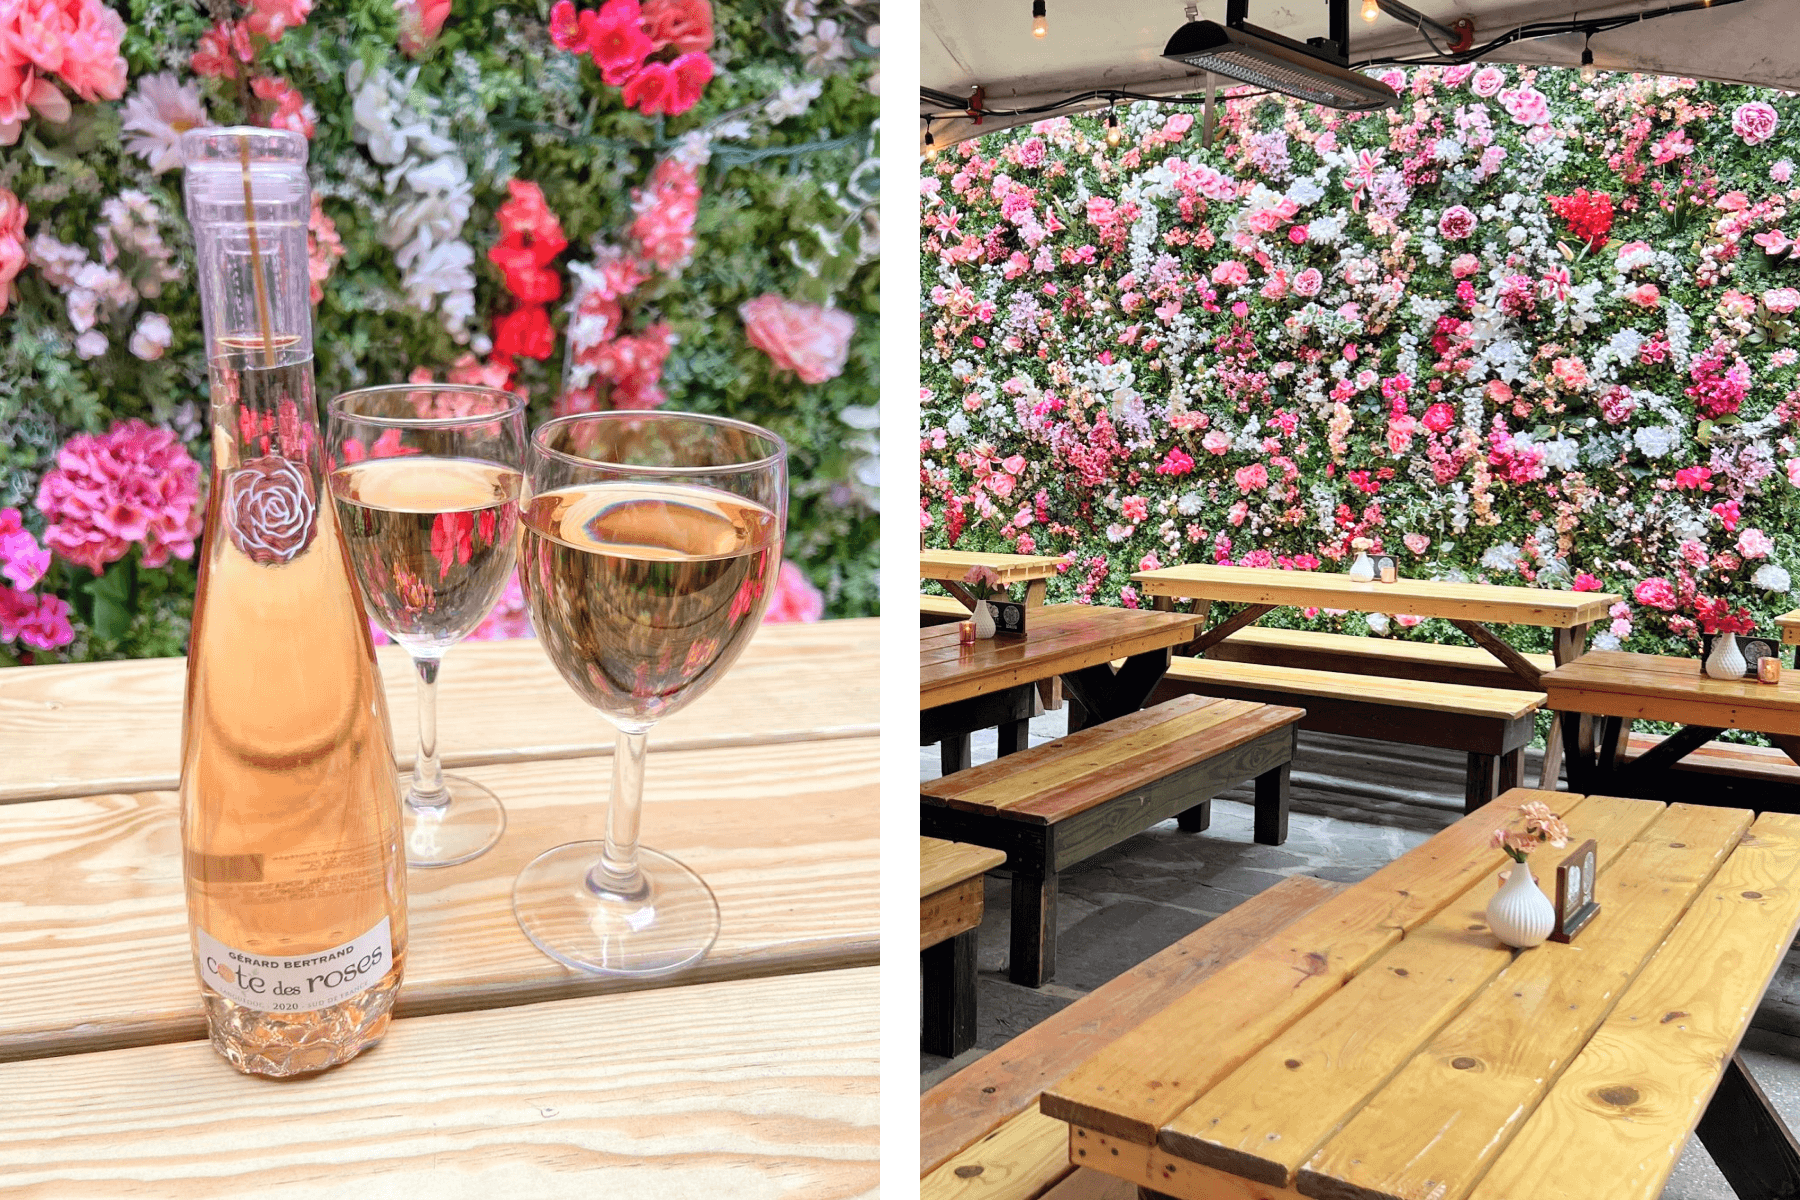 Left: A close up of two glasses and a bottle of rose on a wooden bench; Right: An outdoor seating area with a flower wall.